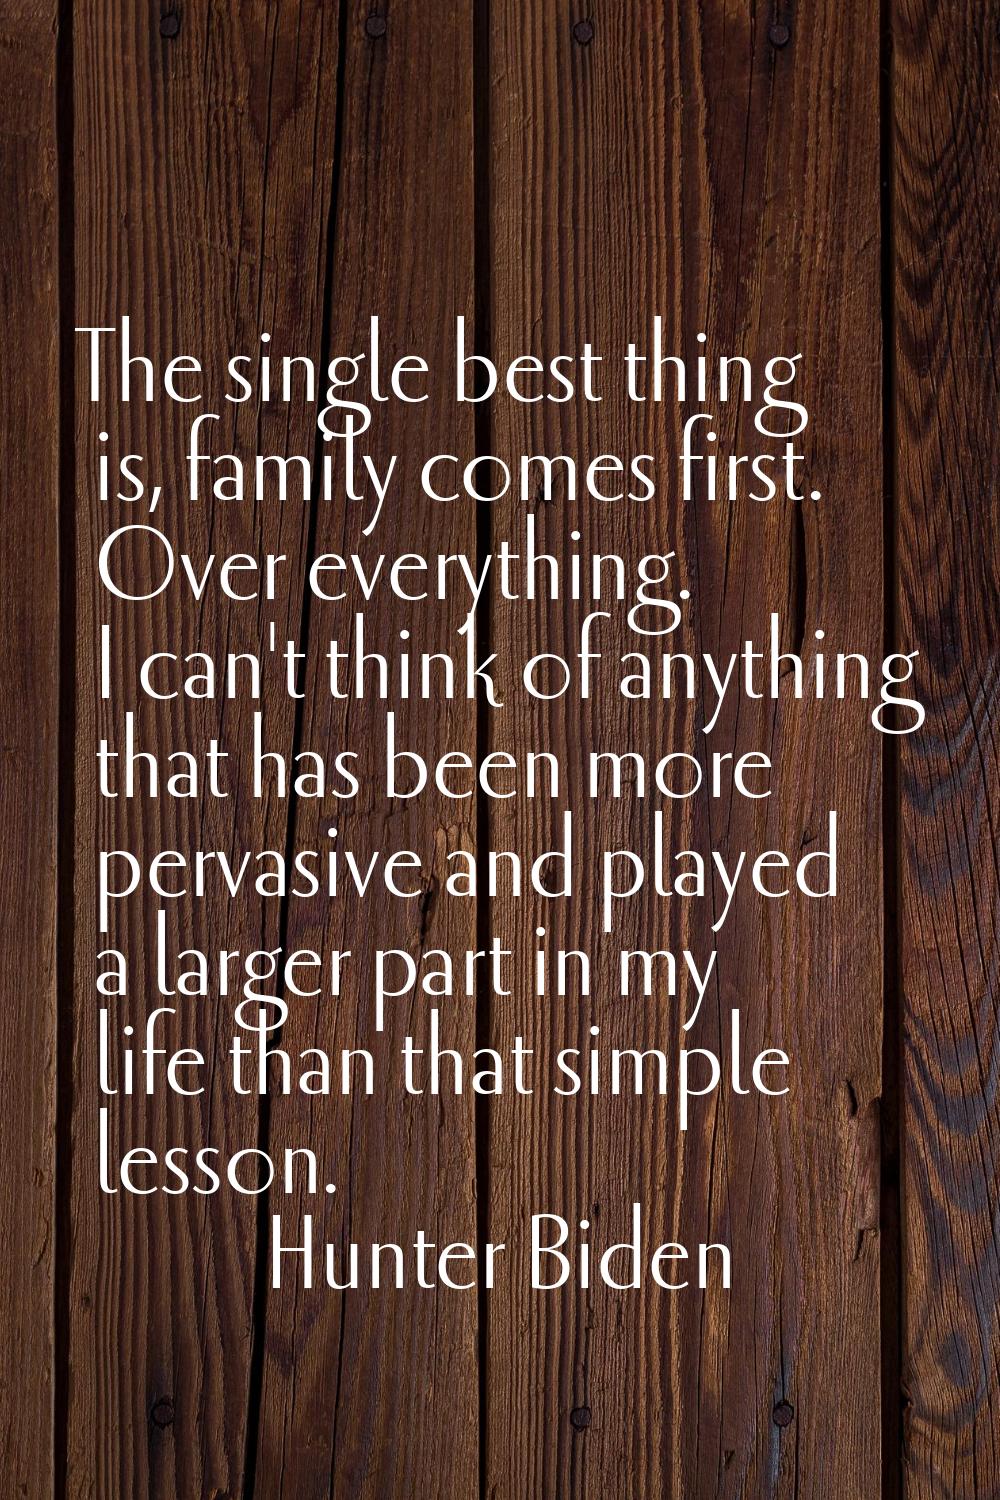 The single best thing is, family comes first. Over everything. I can't think of anything that has b